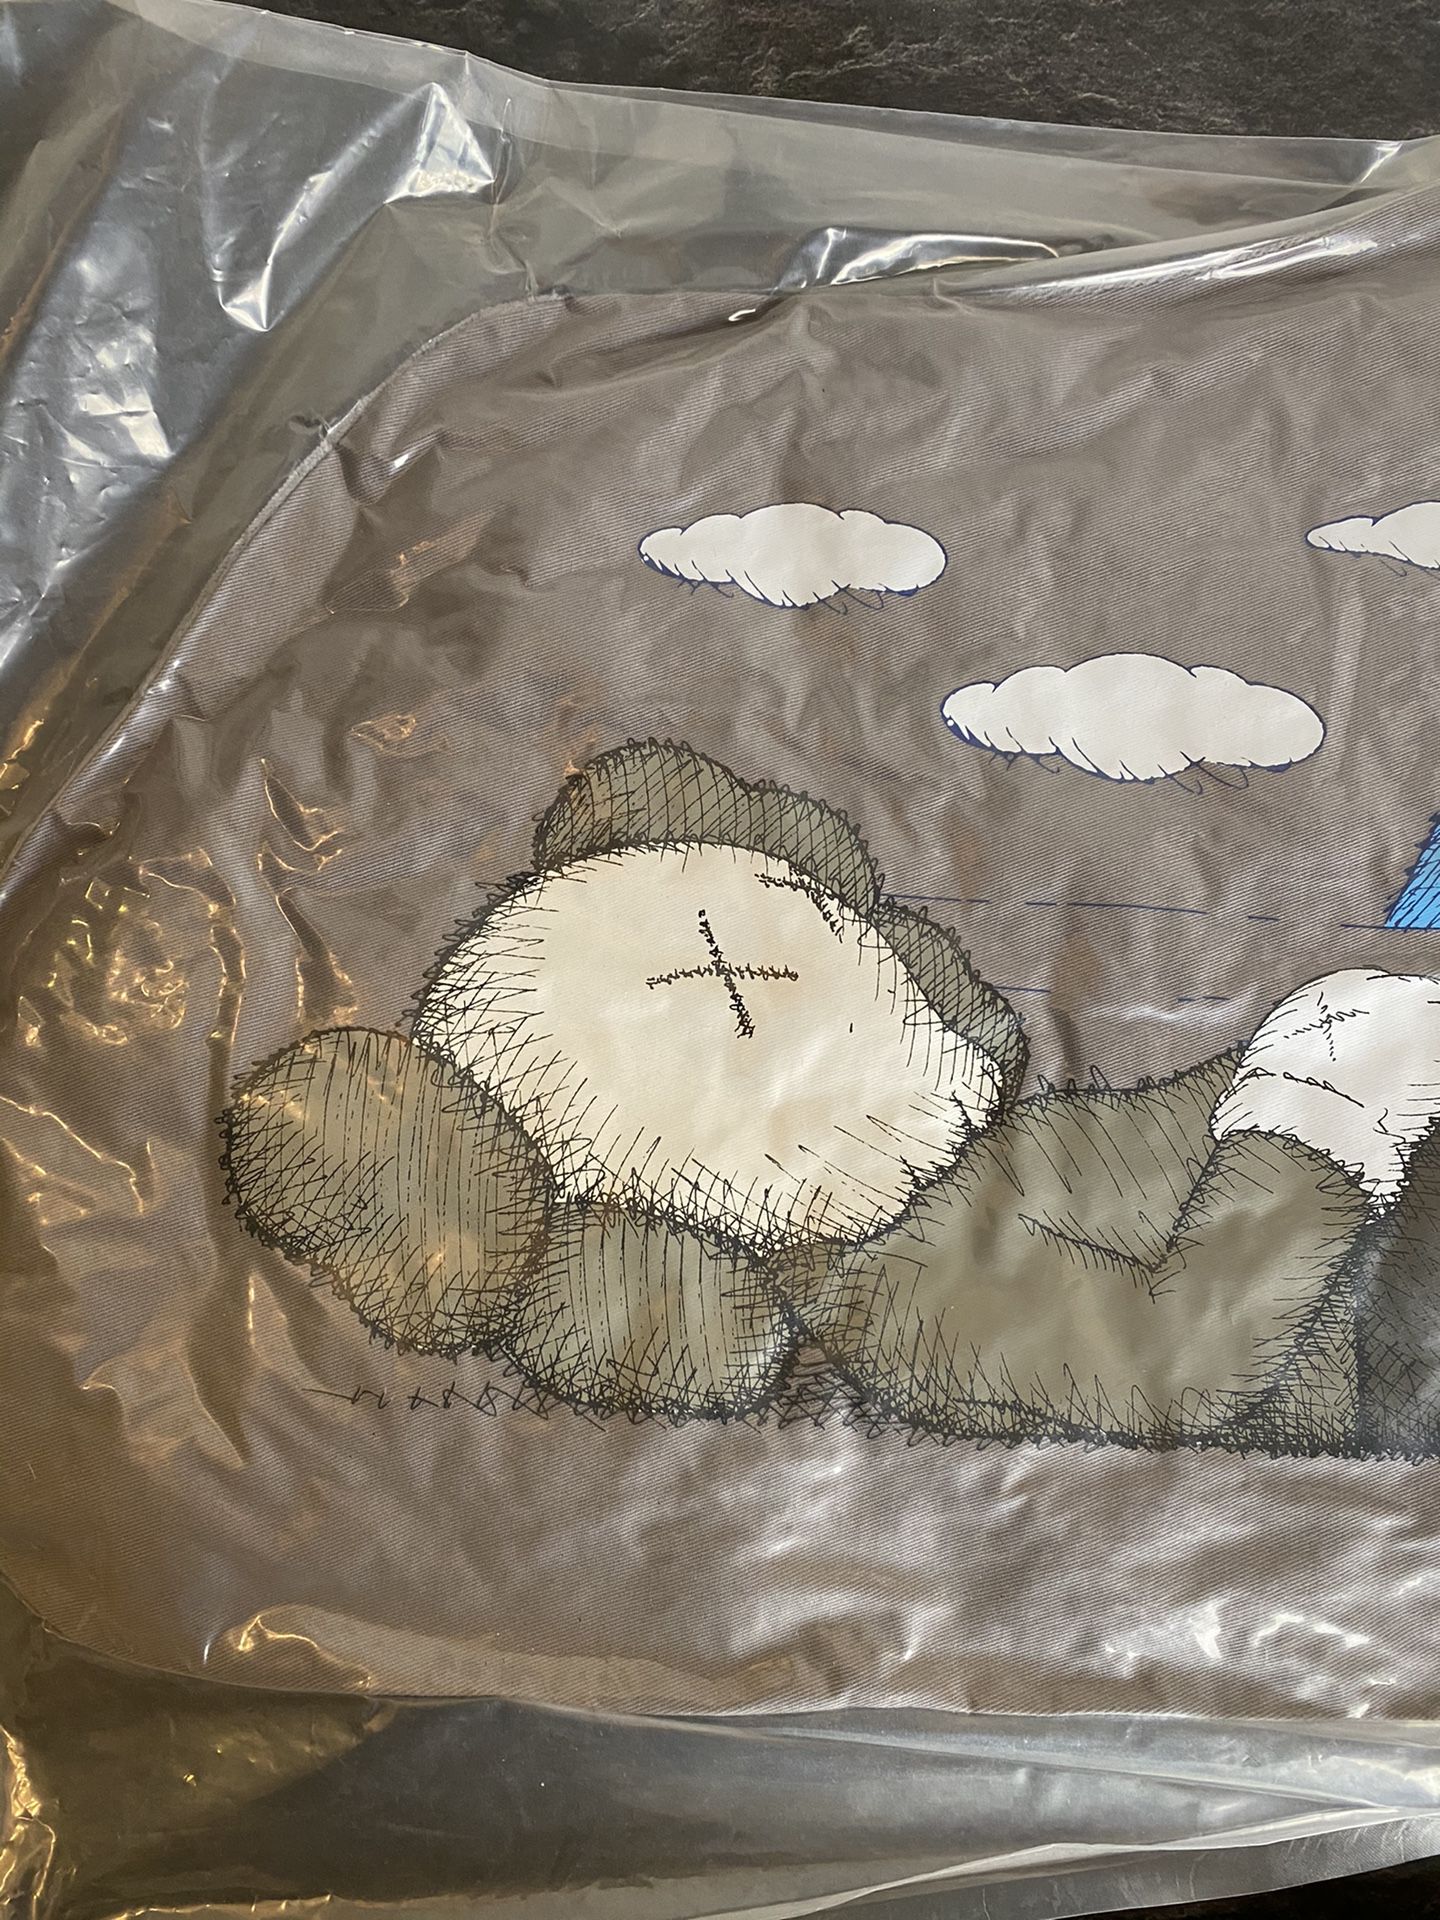 New KAWS Holiday Japan Pillow Companion Mount Fuji Cushion SEALED Collectible Dead Stock / Collectors Item 100% Authentic Sold Out